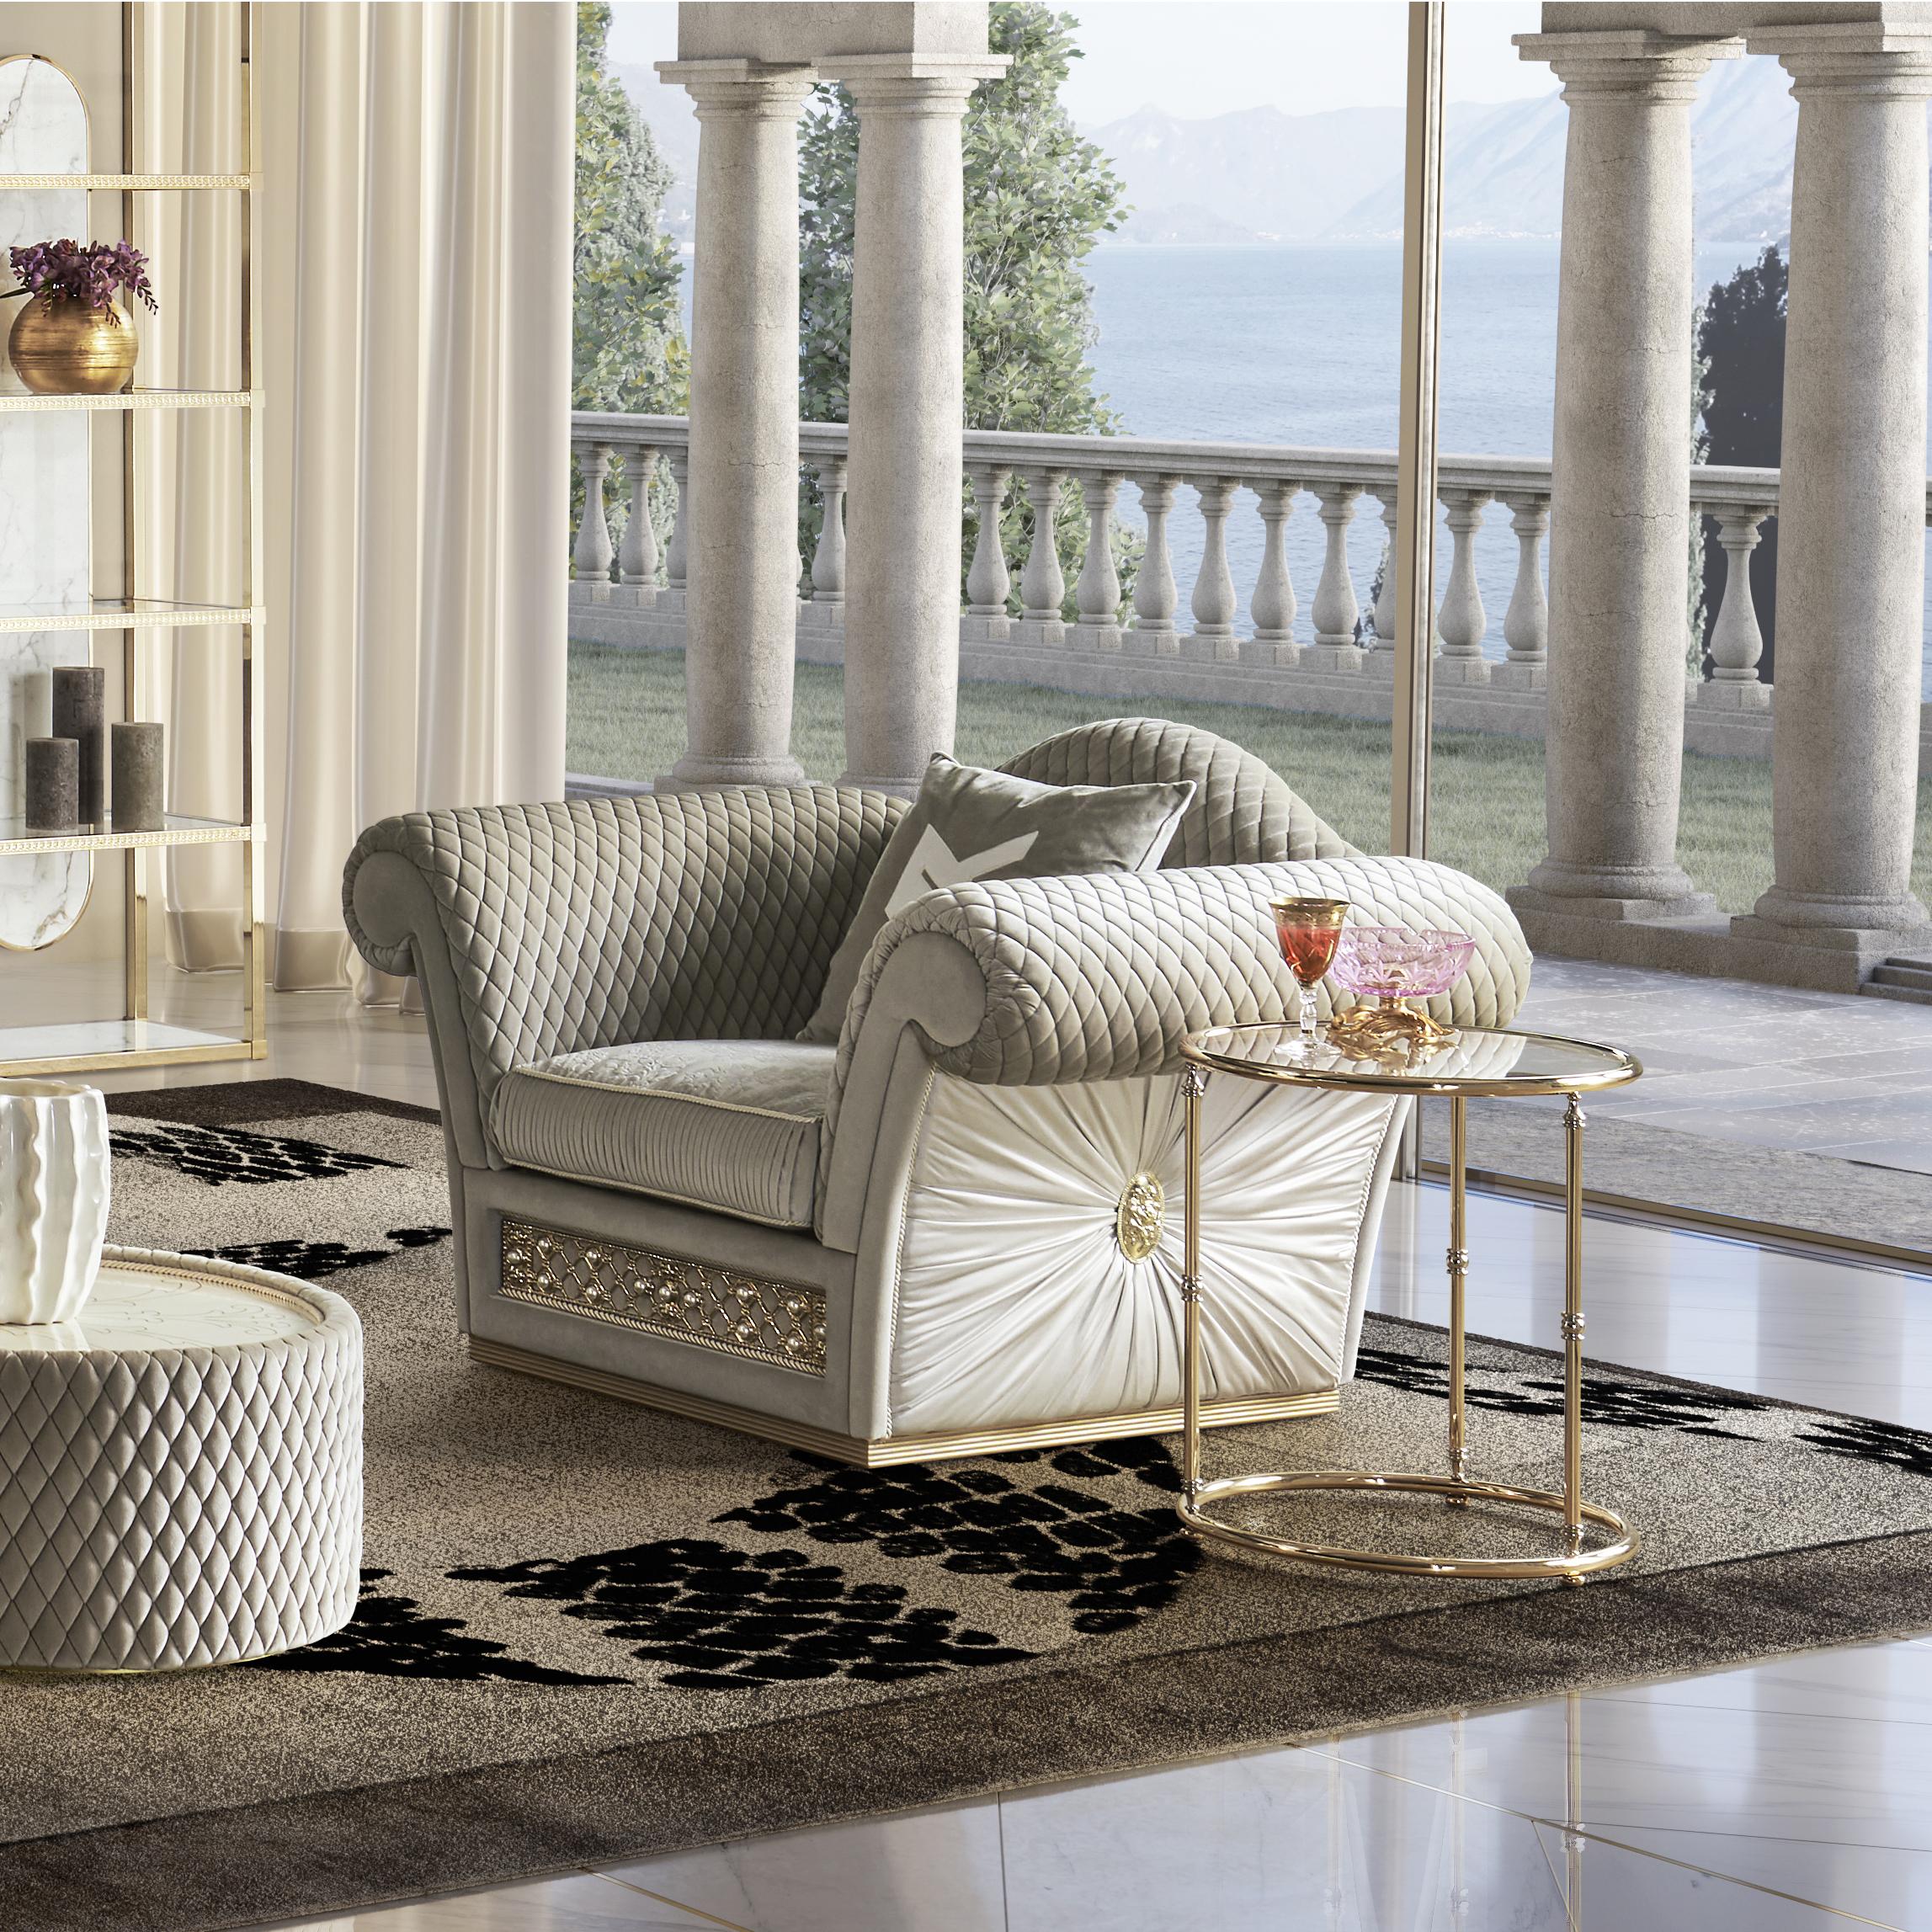 Cozy and majestic, the Equilibrium armchair invites you to relax and enjoy unparalleled comfort.
Whether placed in the living room of a historic home or in a modern setting, this item adds a touch of luxury and prestige, creating an atmosphere of